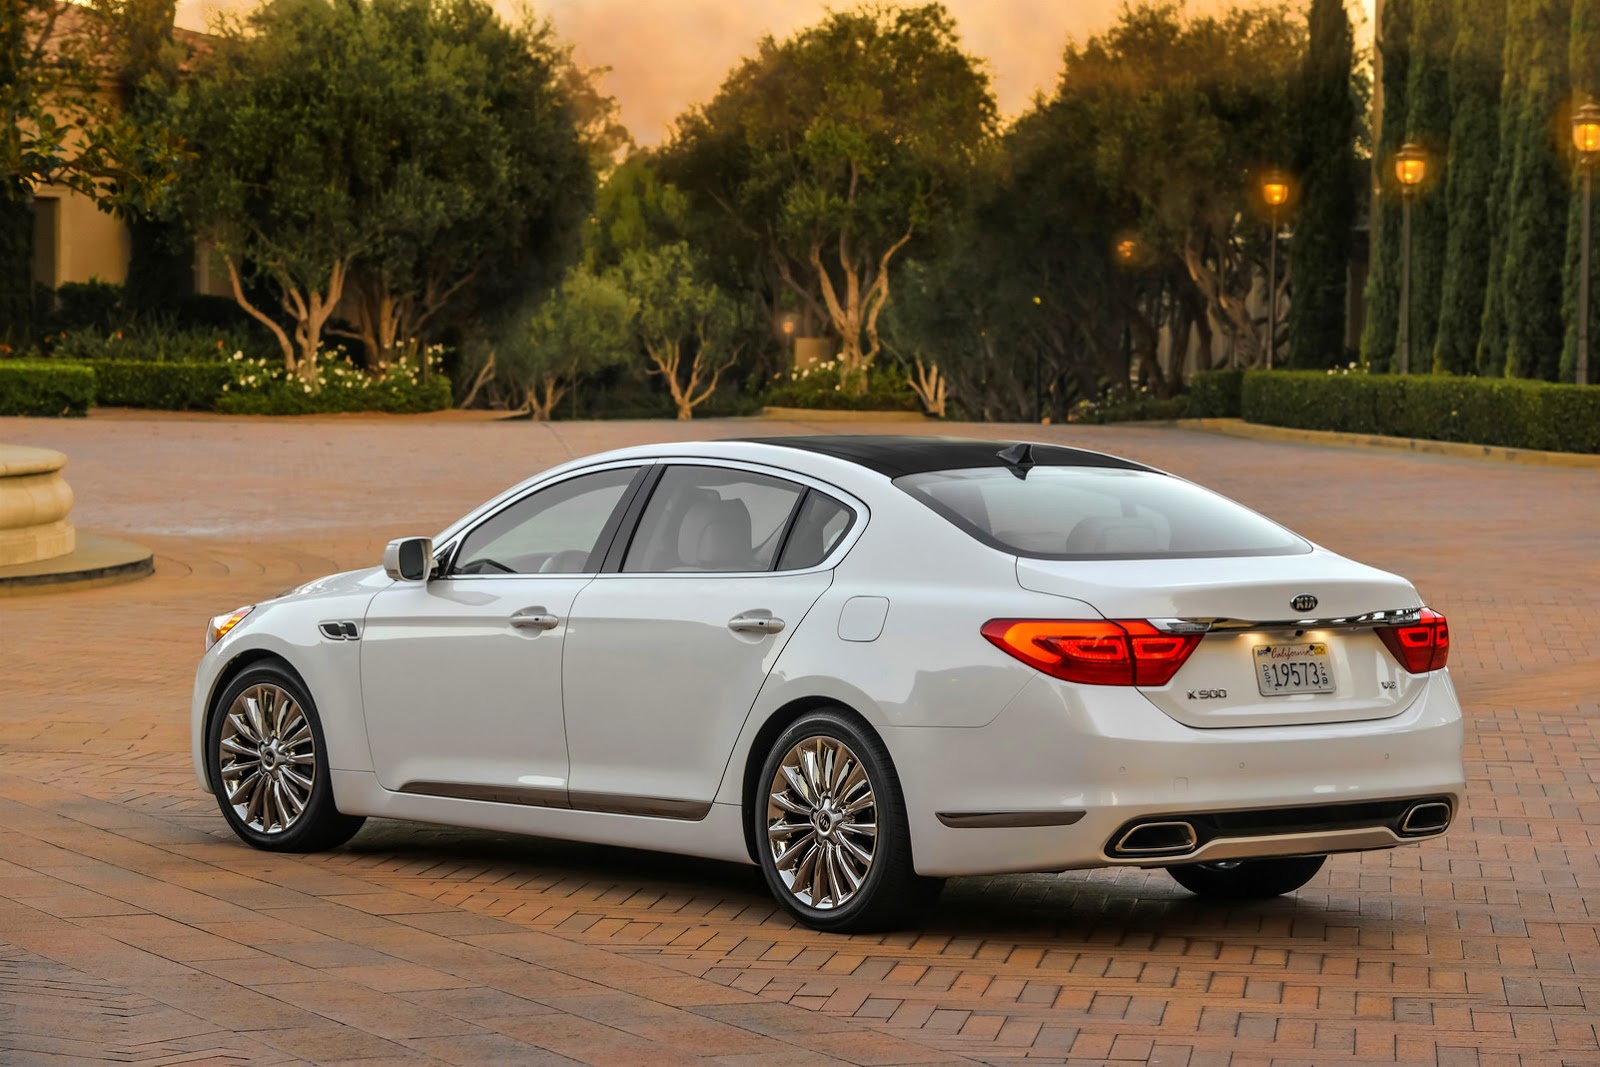 New Kia K900 Luxury Sedan with 420HP V8 Starts at $59,500, More Affordable  V6 to Follow | Carscoops